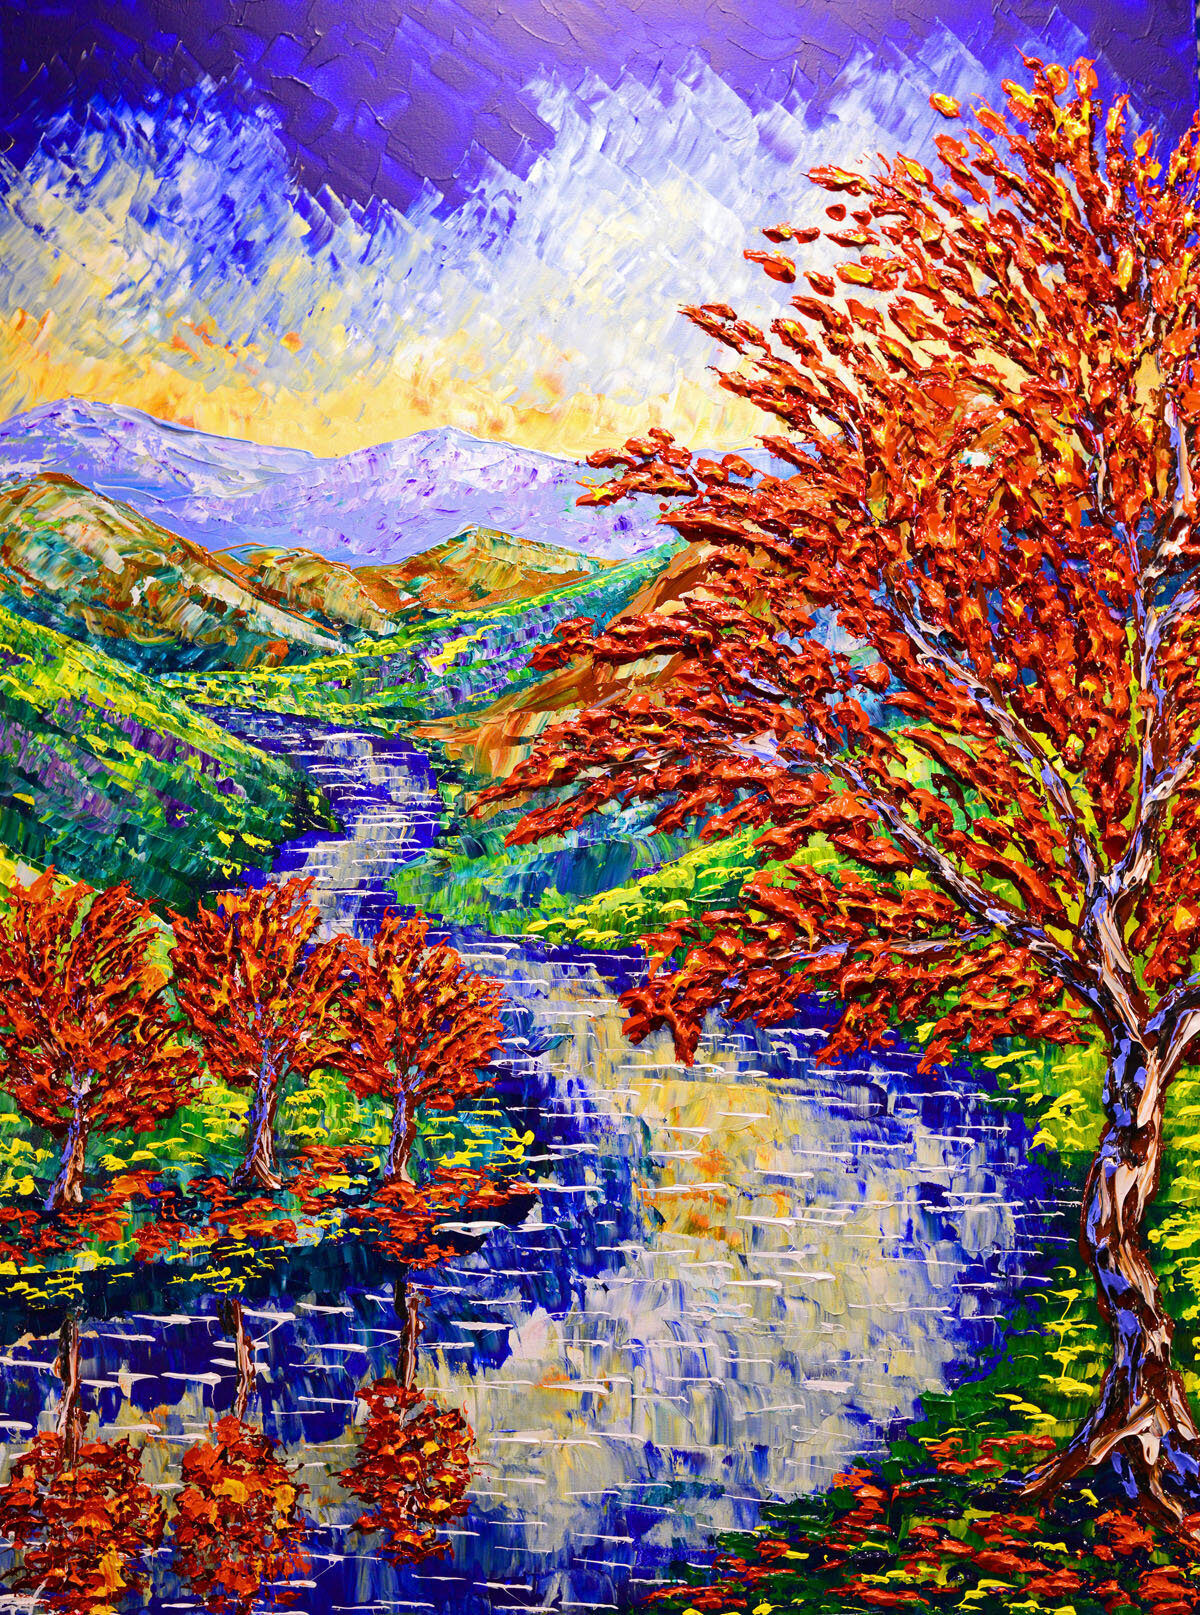 Streams along the Colorful Maples 48x36